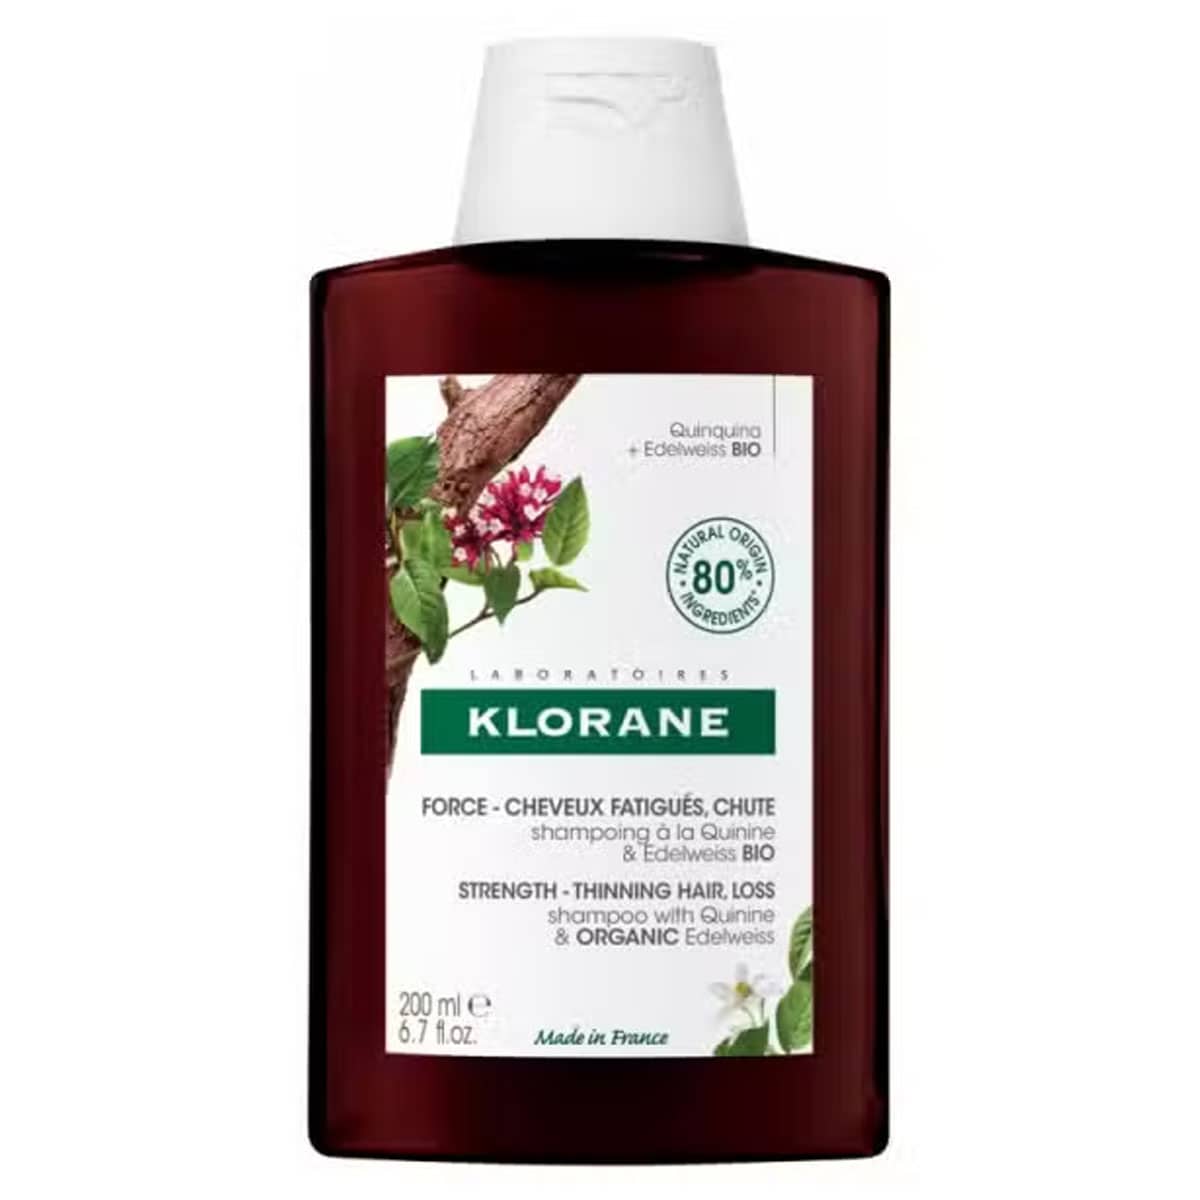 Klorane Natural Strengthening Shampoo With Quinine And Organise Edelweiss 200Ml